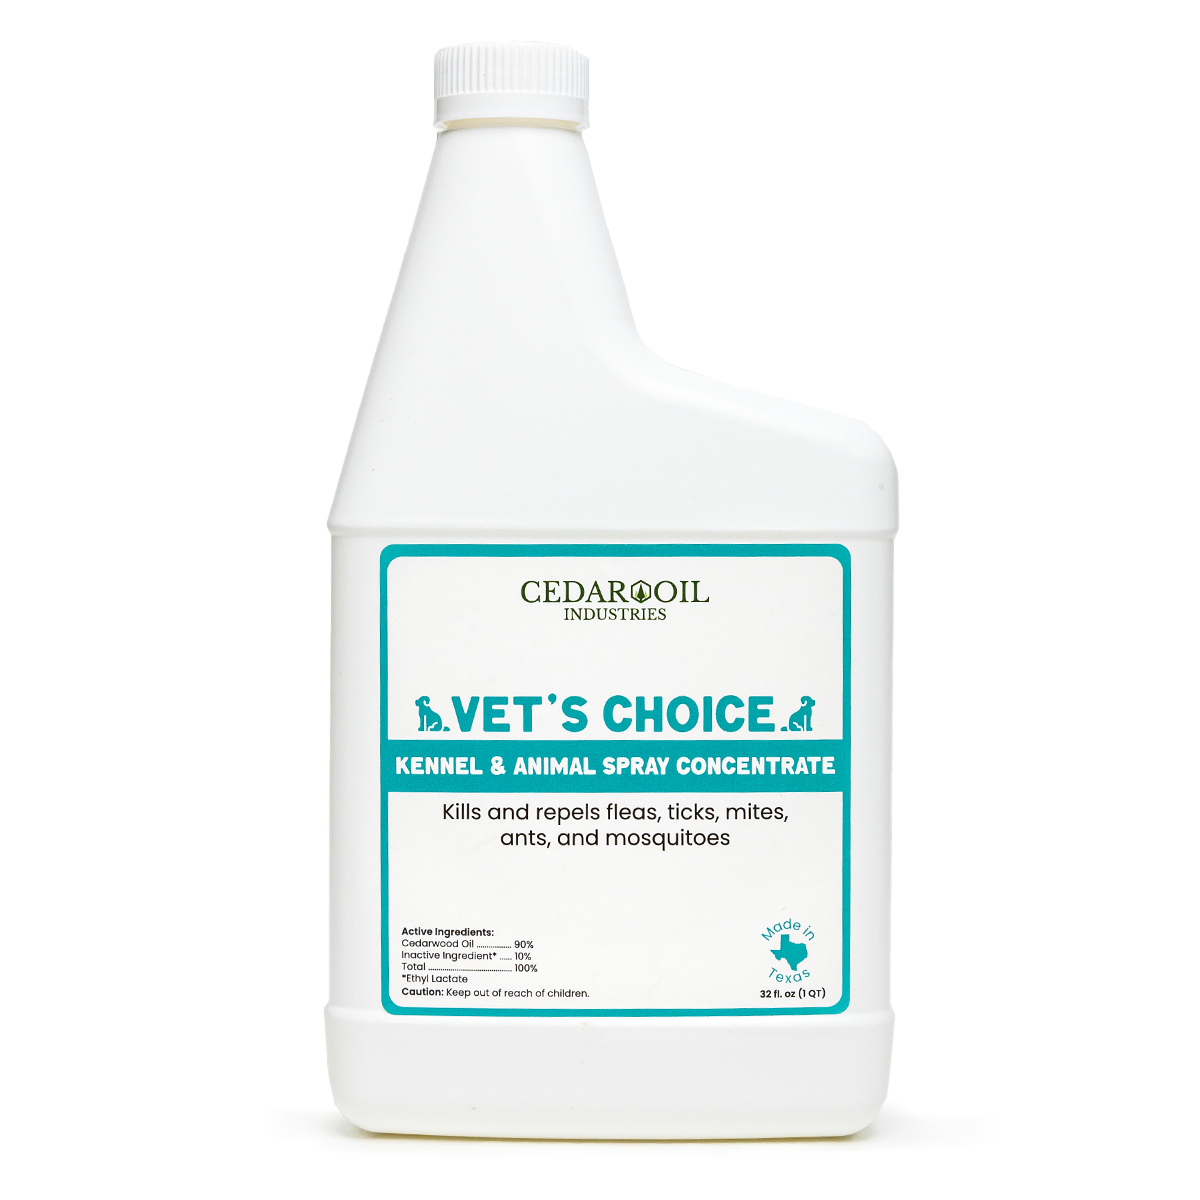 Vet's Choice Concentrate - Lawn, Kennel & Pet Spray